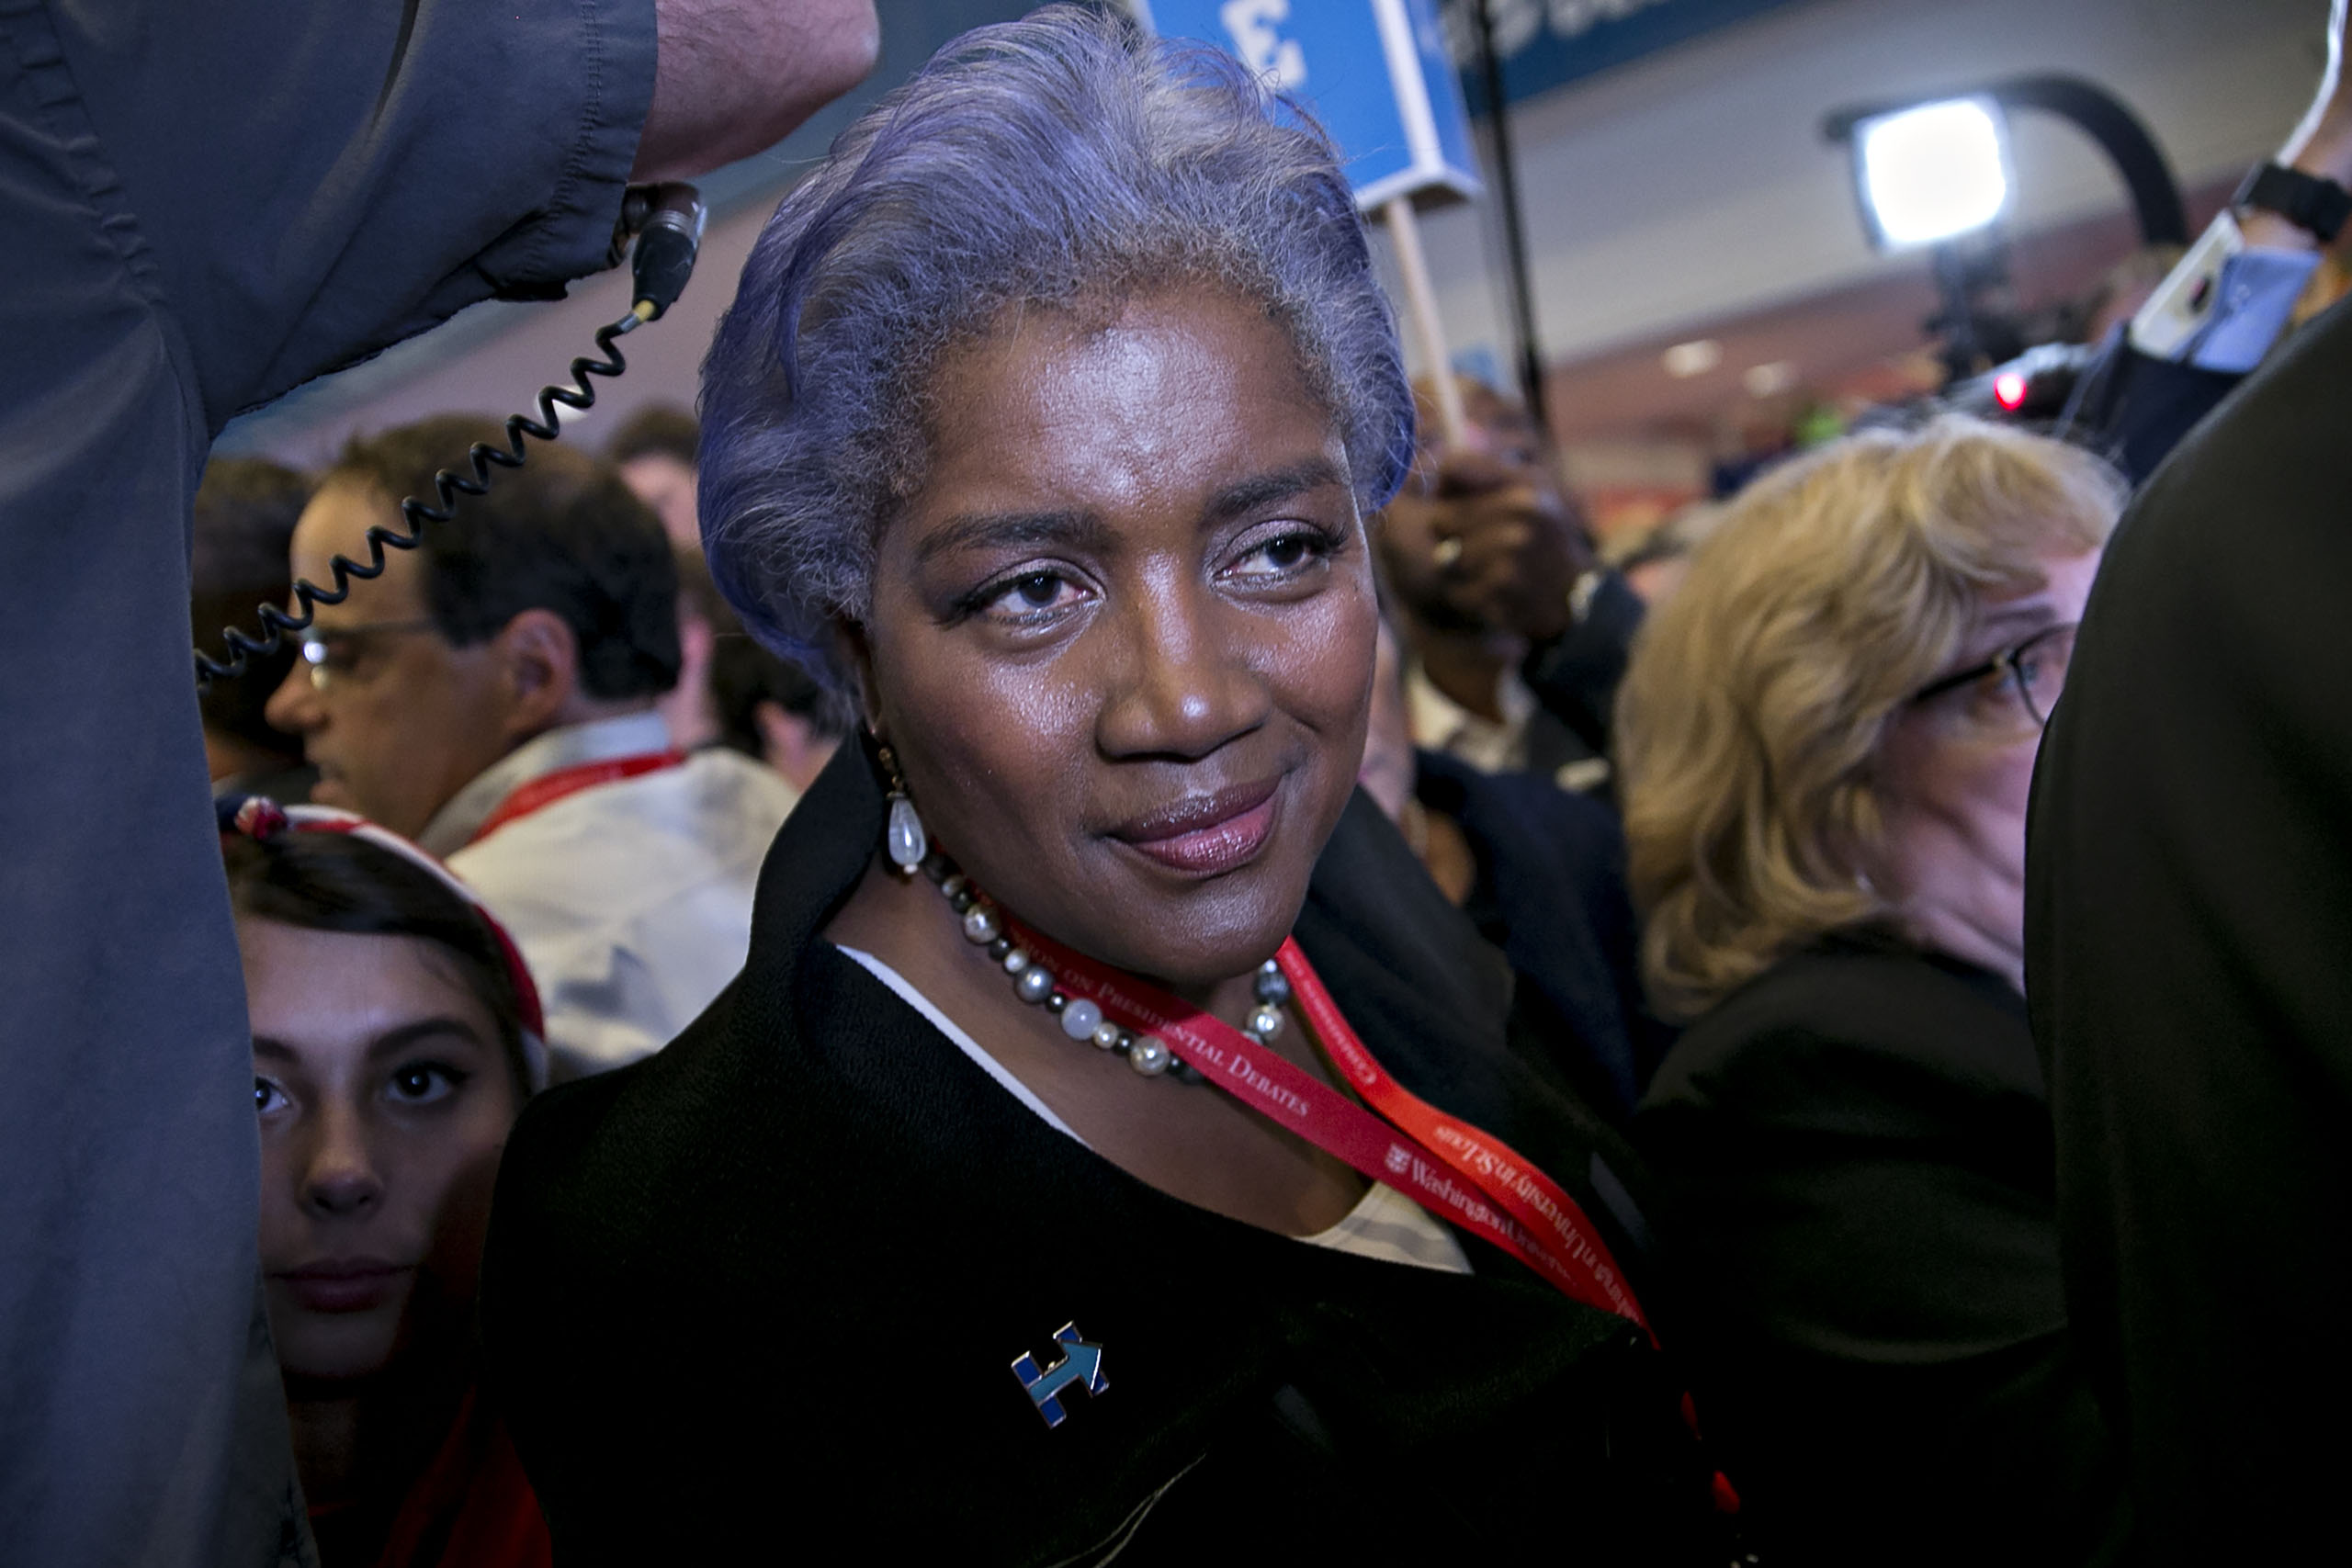 Donna Brazile, vice chair of the Democratic National Committee (DNC), walks through the spin room after the second U.S. presidential debate at Washington University in St. Louis, Missouri, U.S., on Oct. 9, 2016. (Andrew Harrer—Bloomberg/Getty Images)